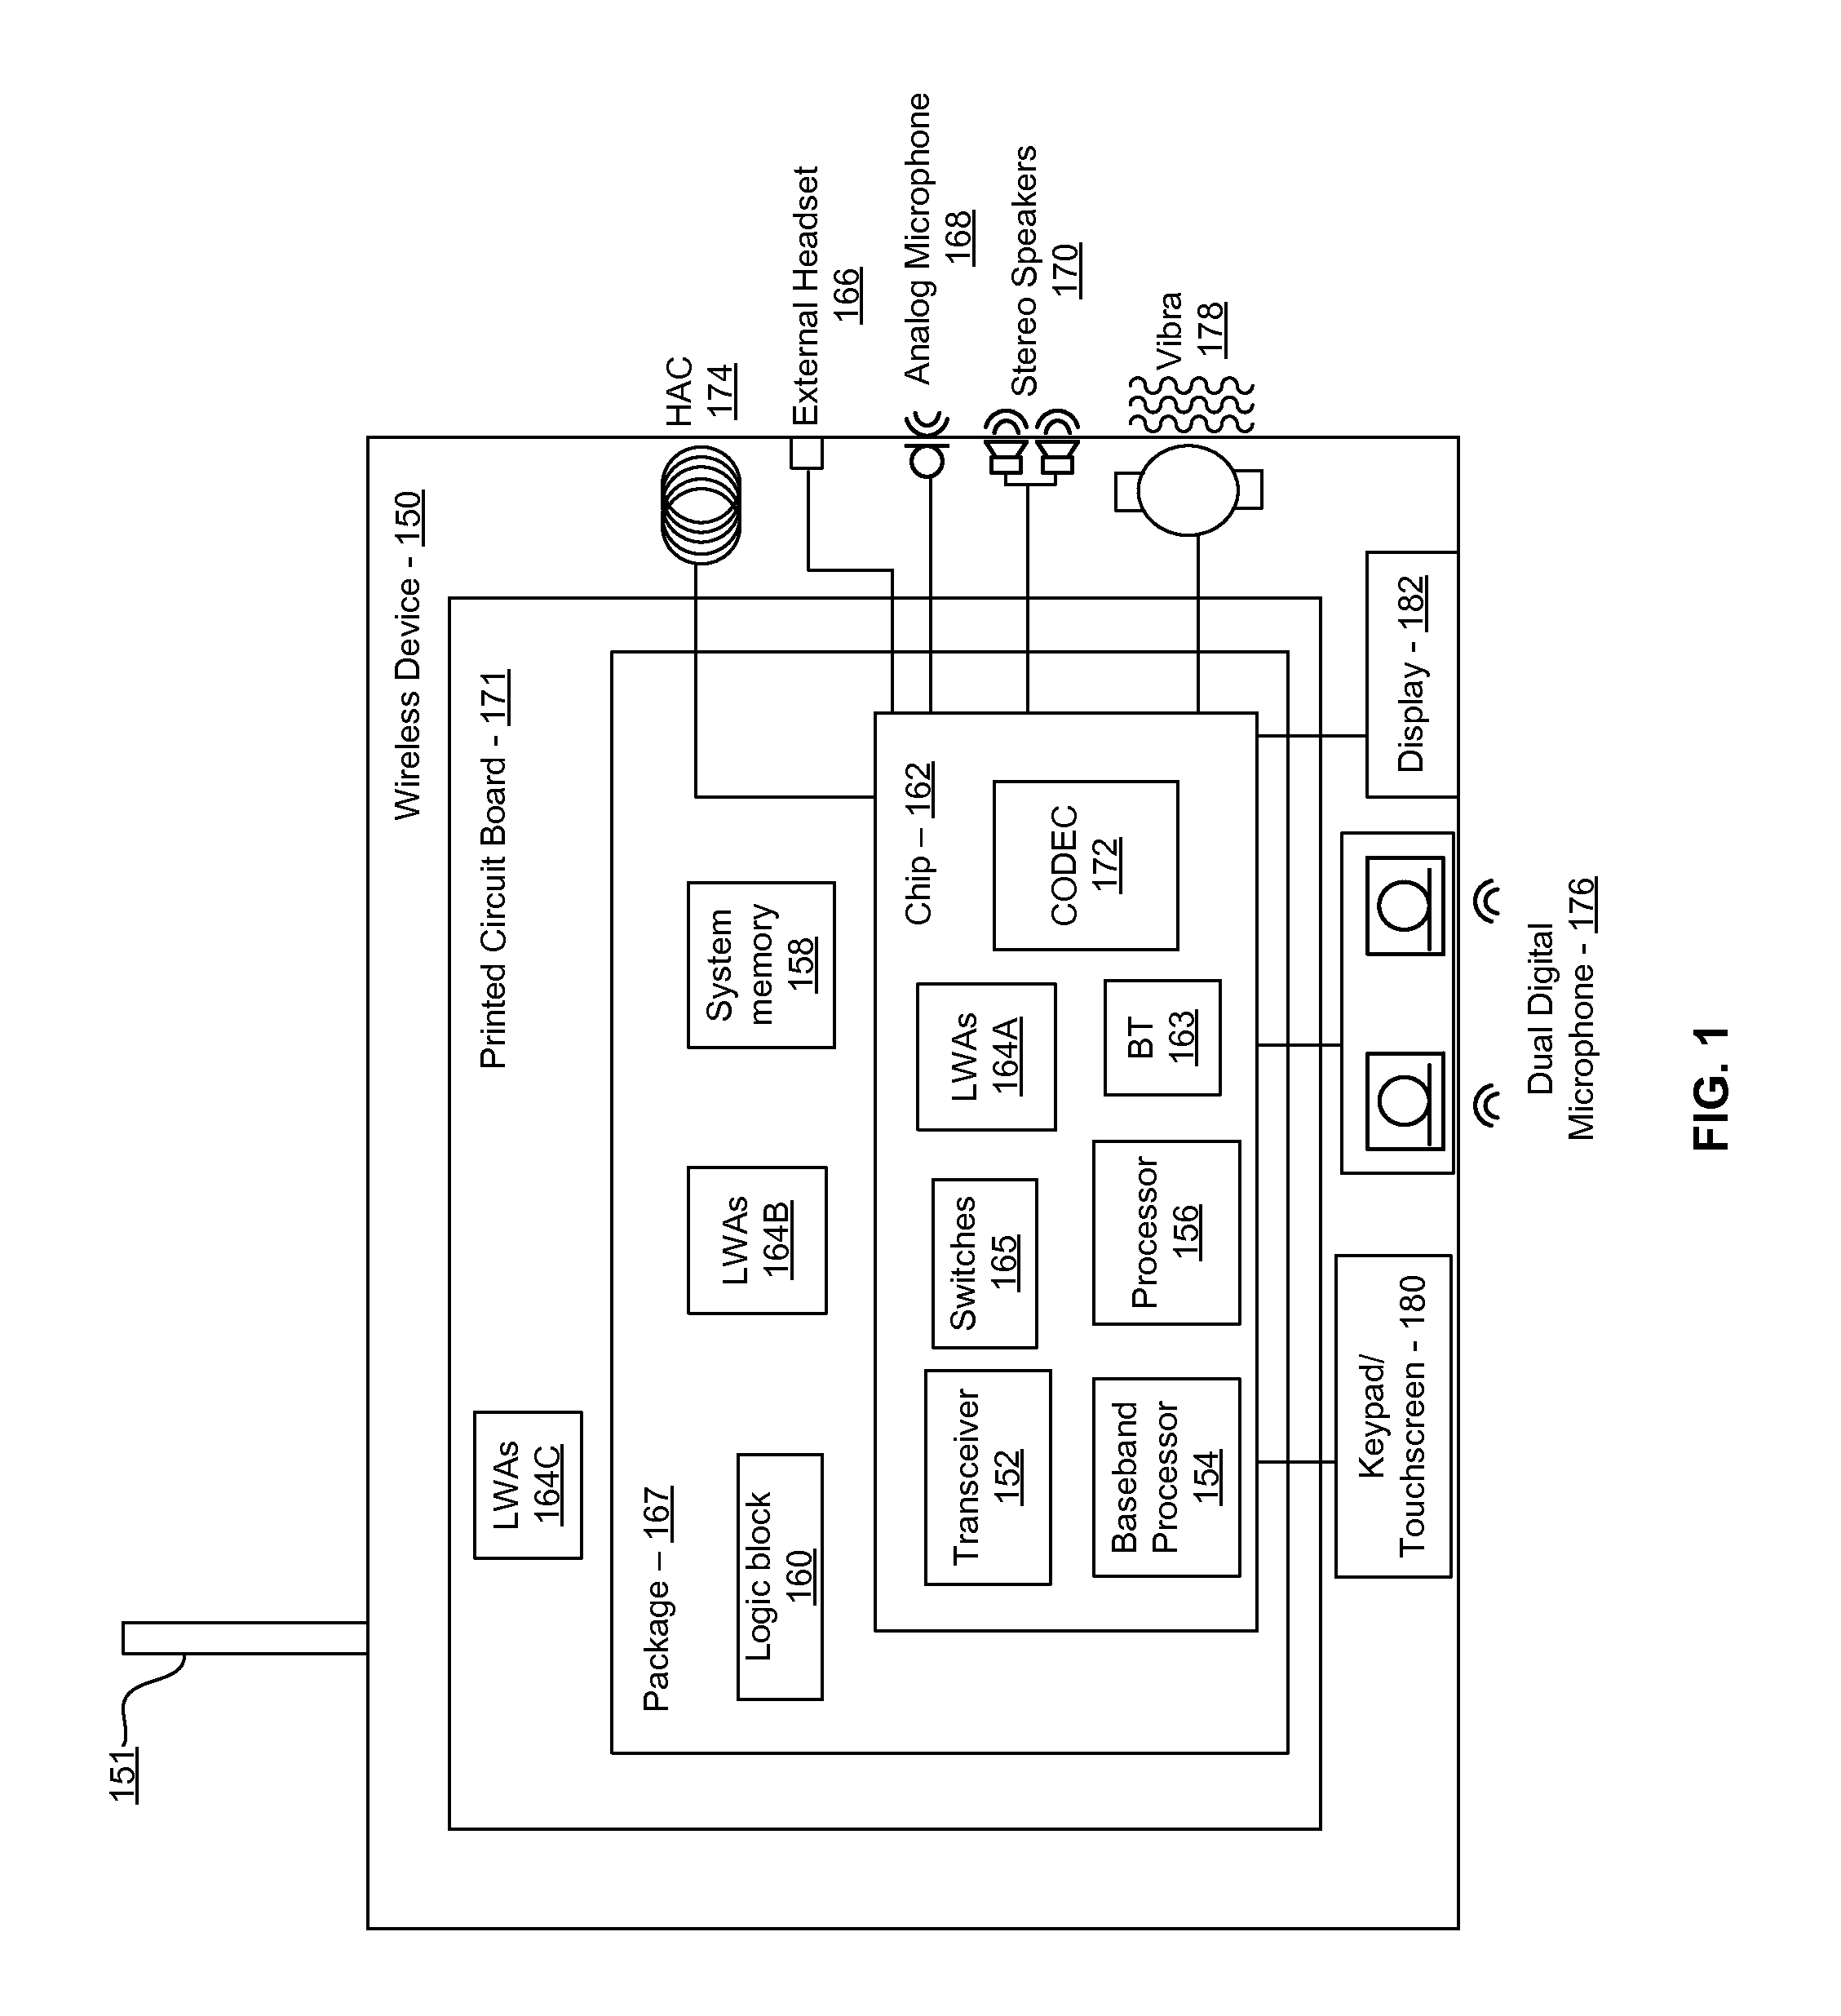 Method and system for dynamic range detection and positioning utilizing leaky wave antennas